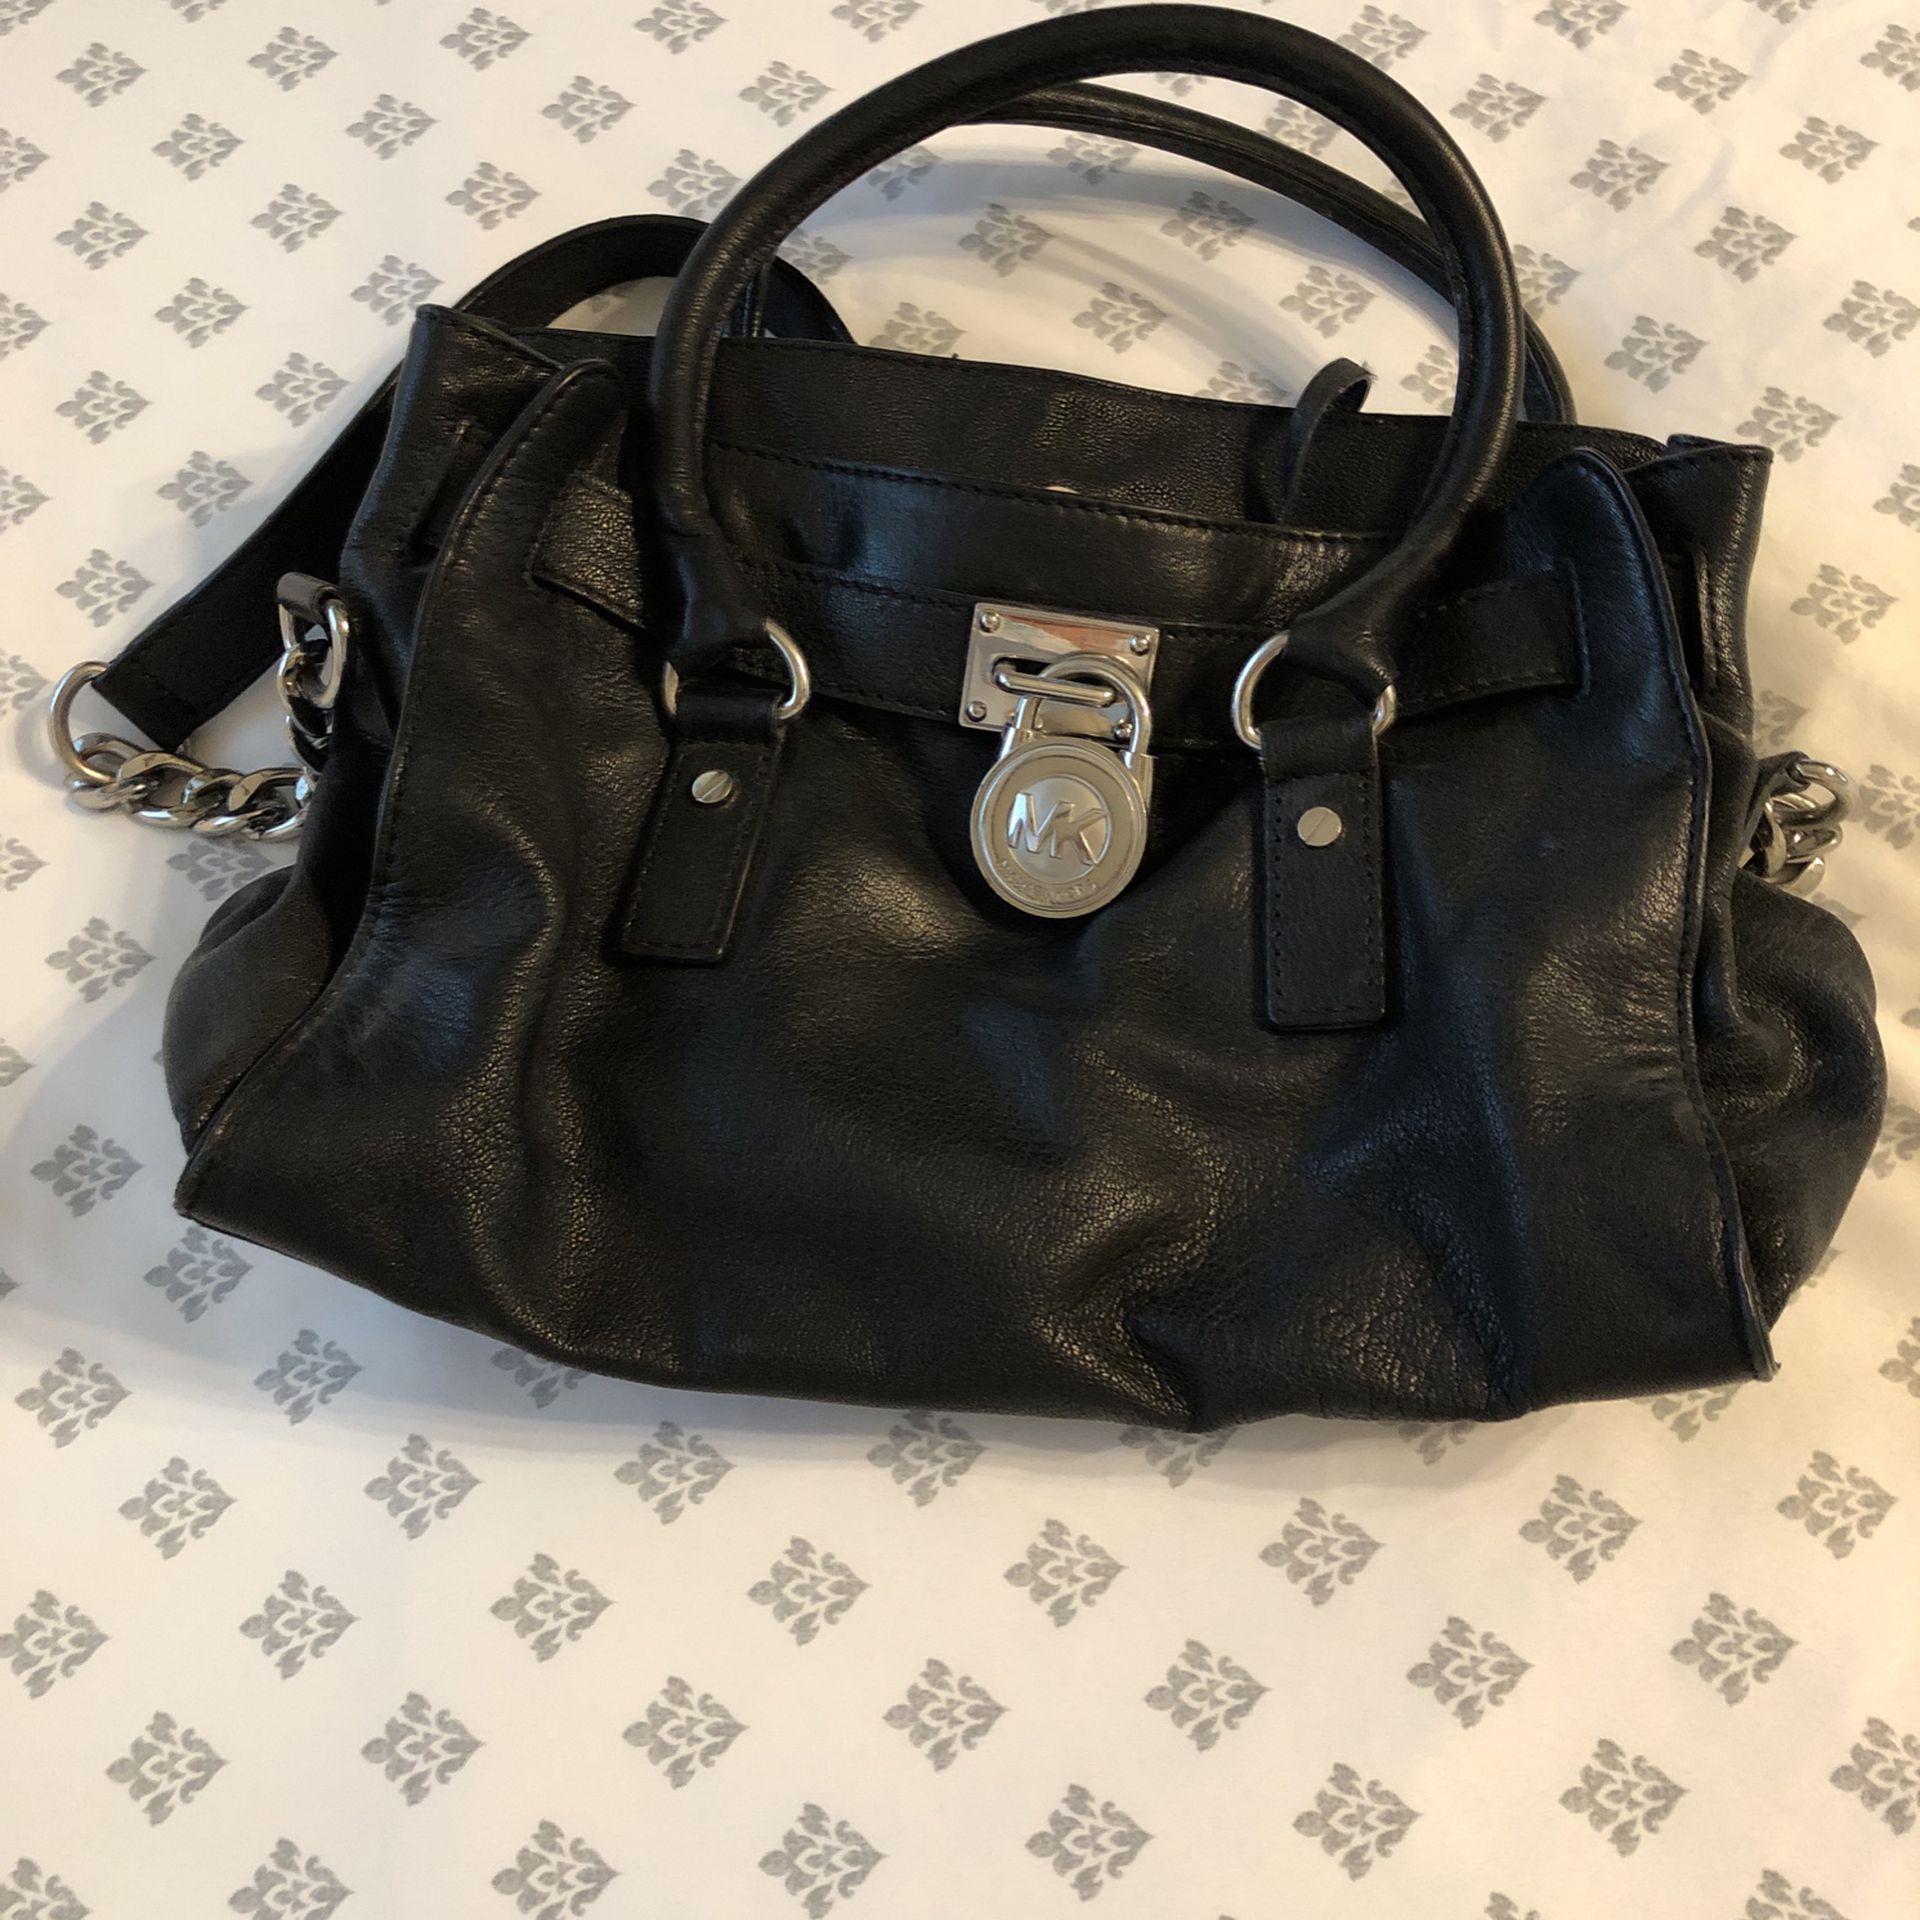 Louis Vuitton Messenger Bag for Sale in Irwindale, CA - OfferUp